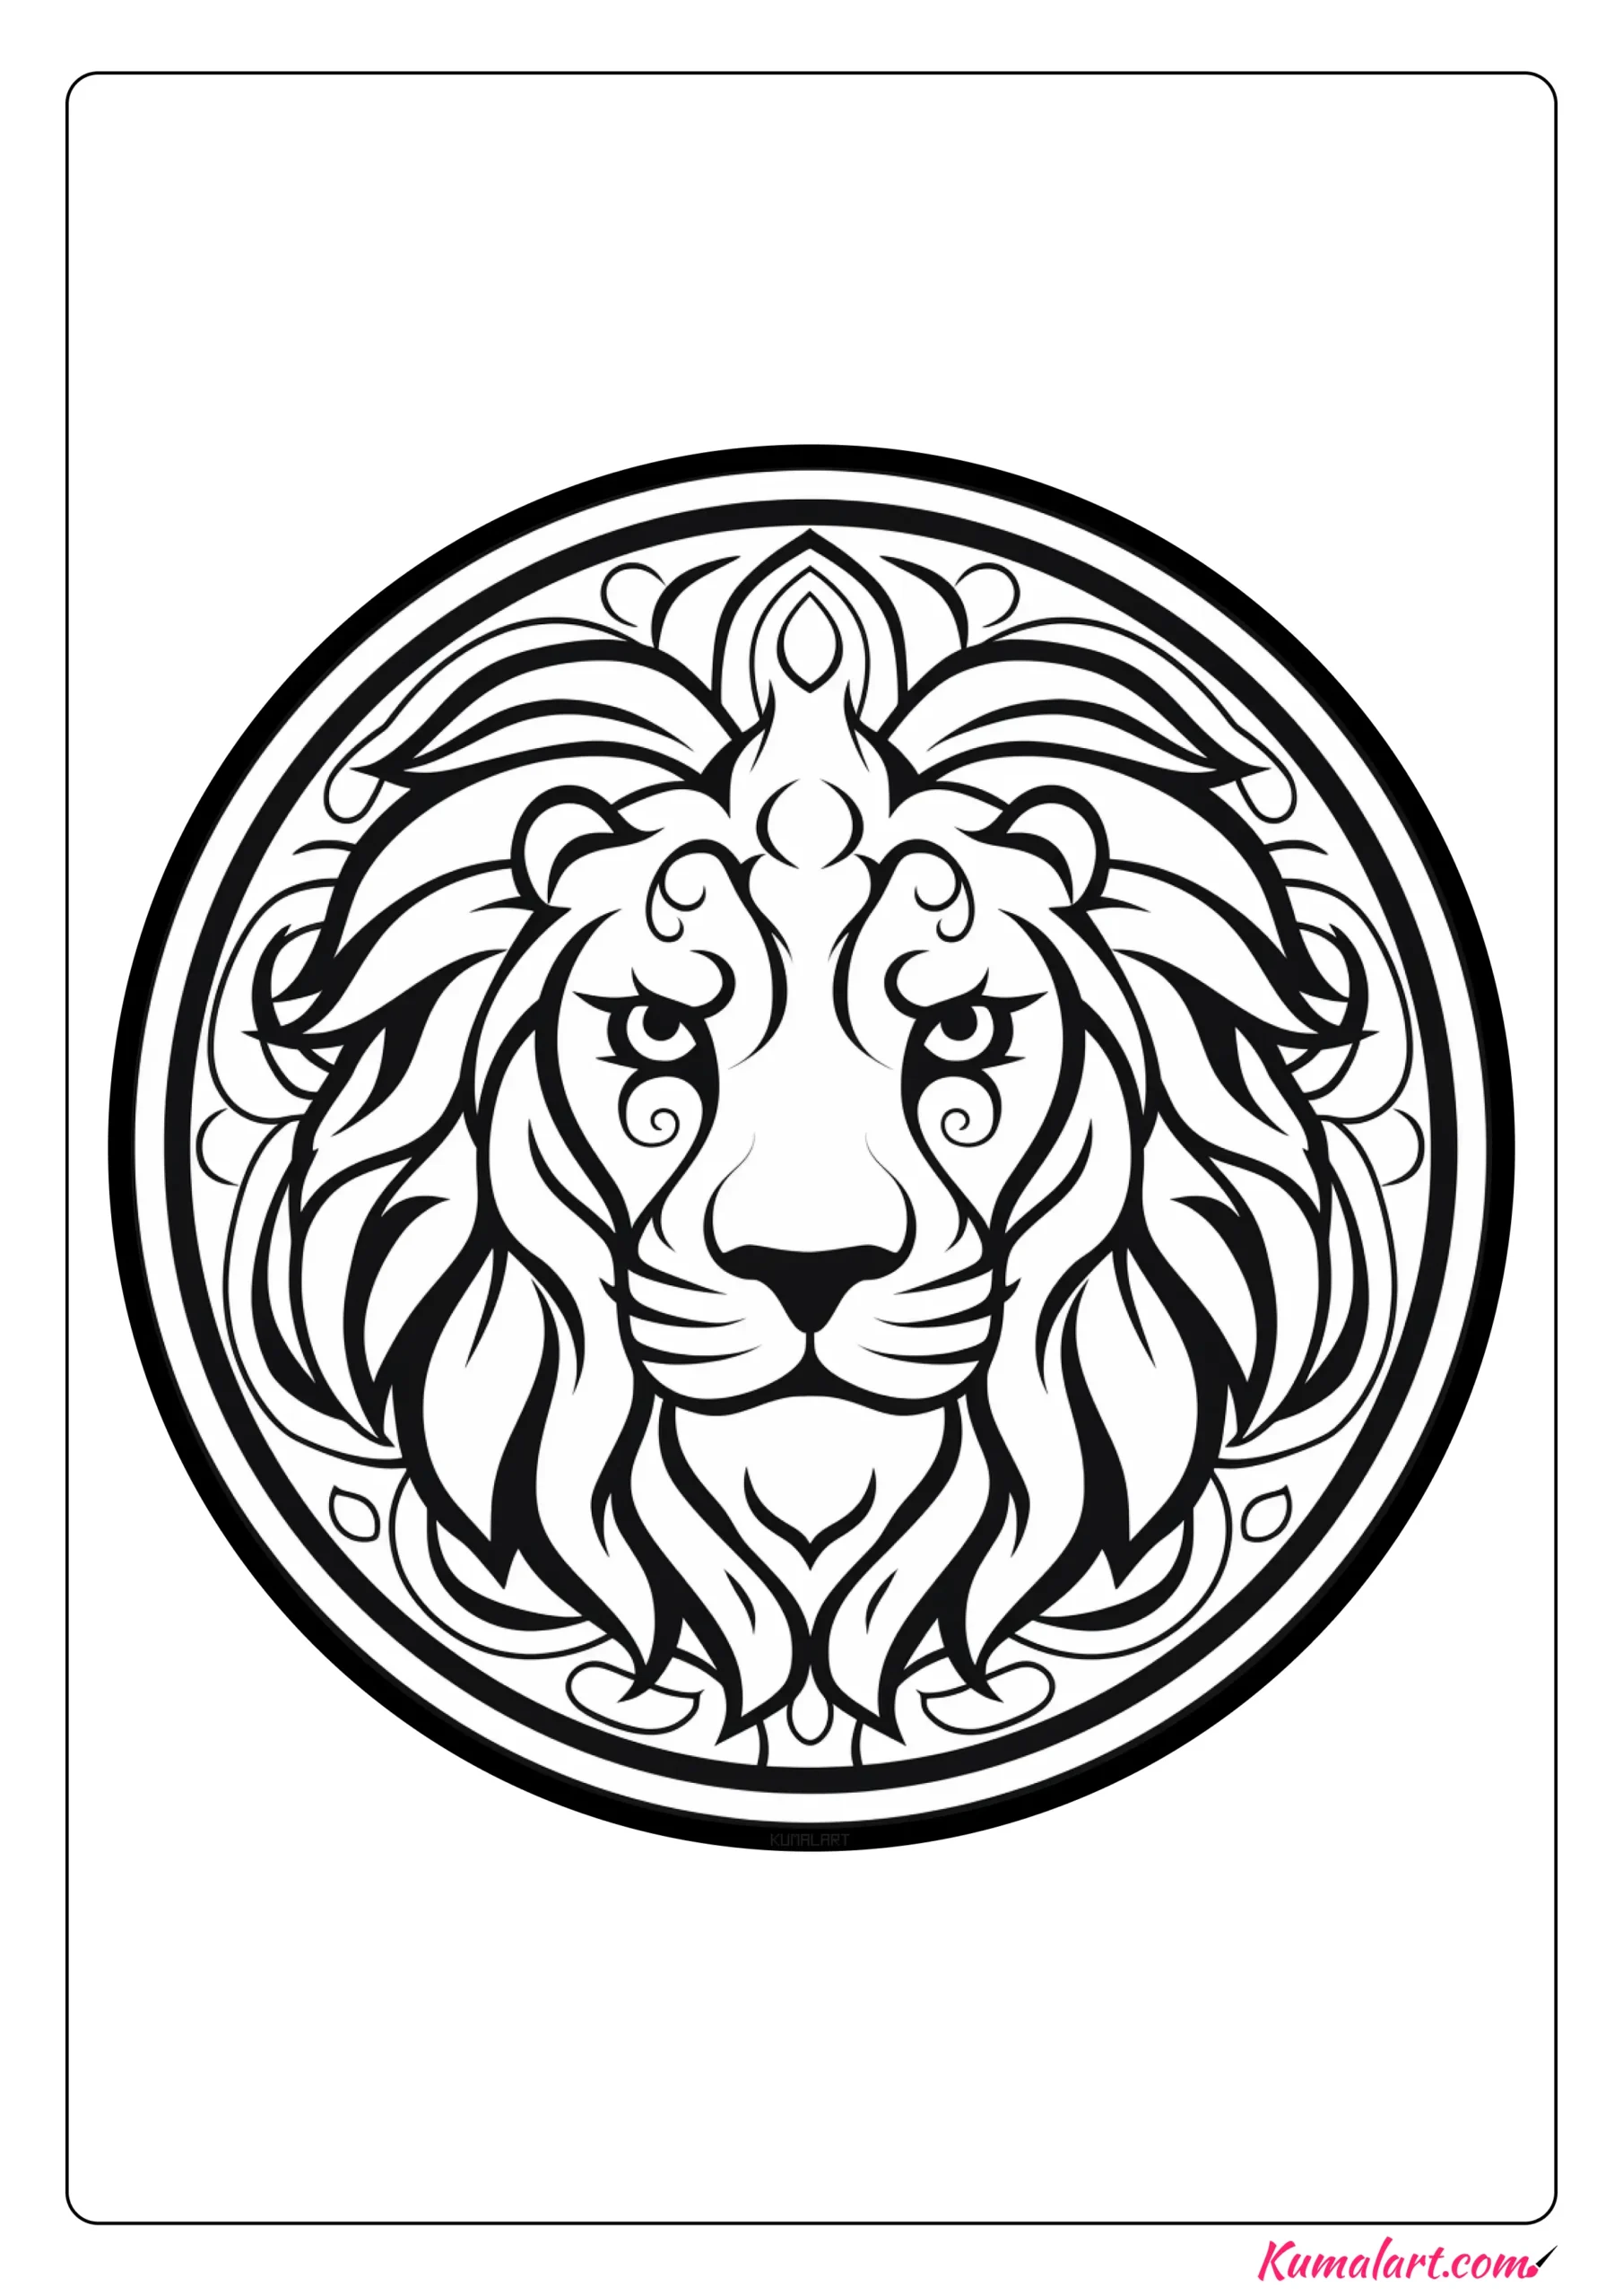 Rocky the Lion Mandala Coloring Page